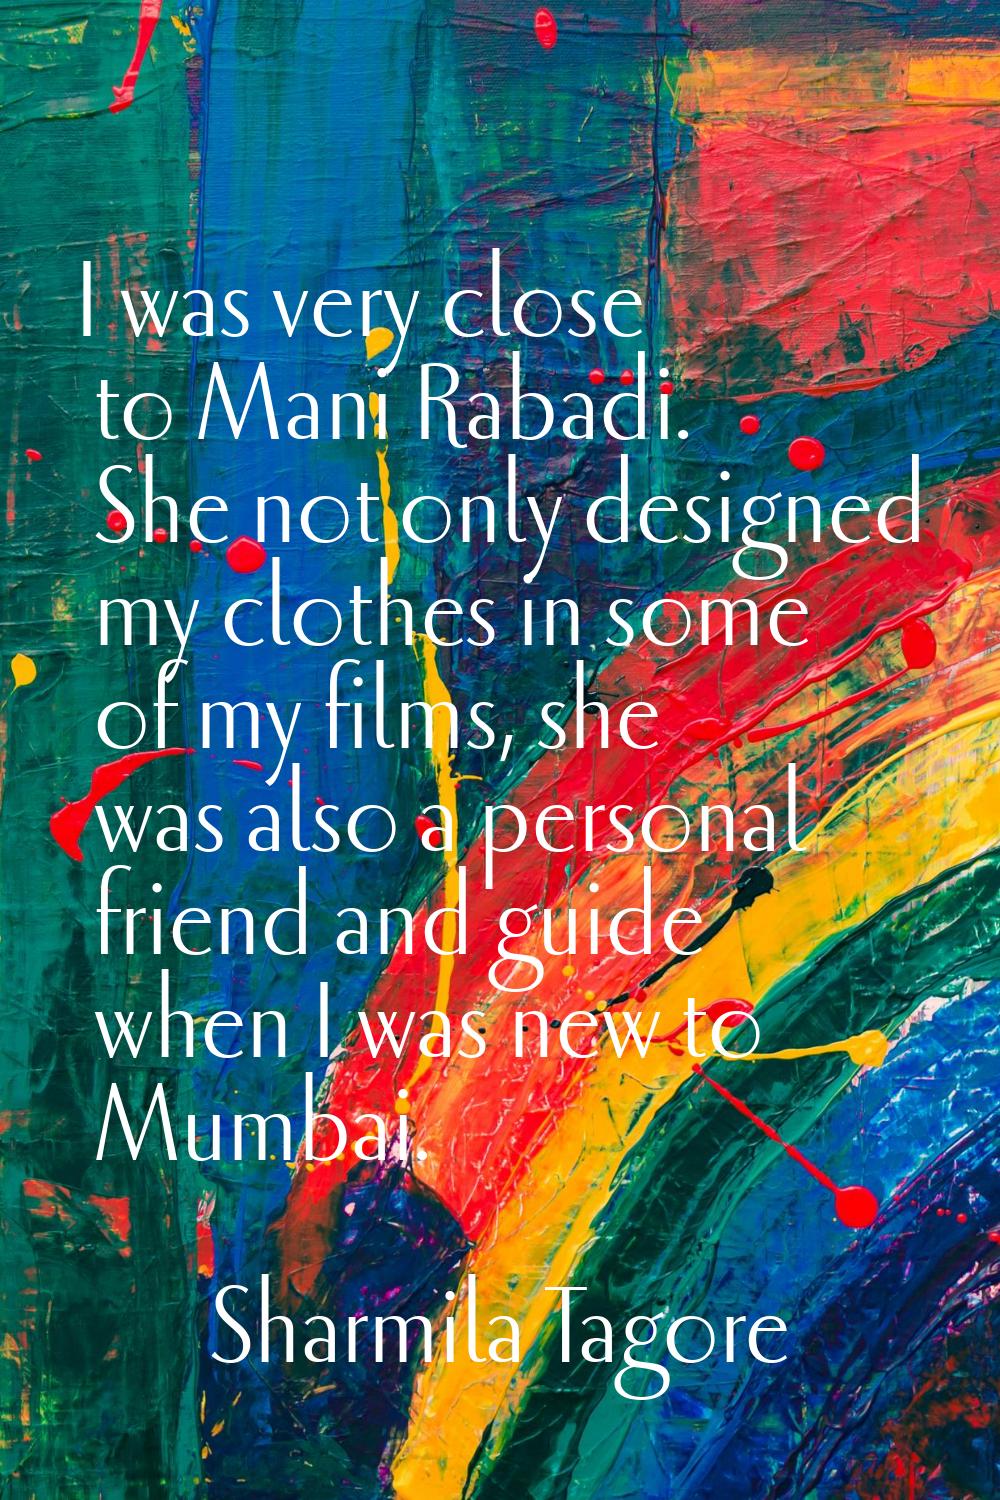 I was very close to Mani Rabadi. She not only designed my clothes in some of my films, she was also